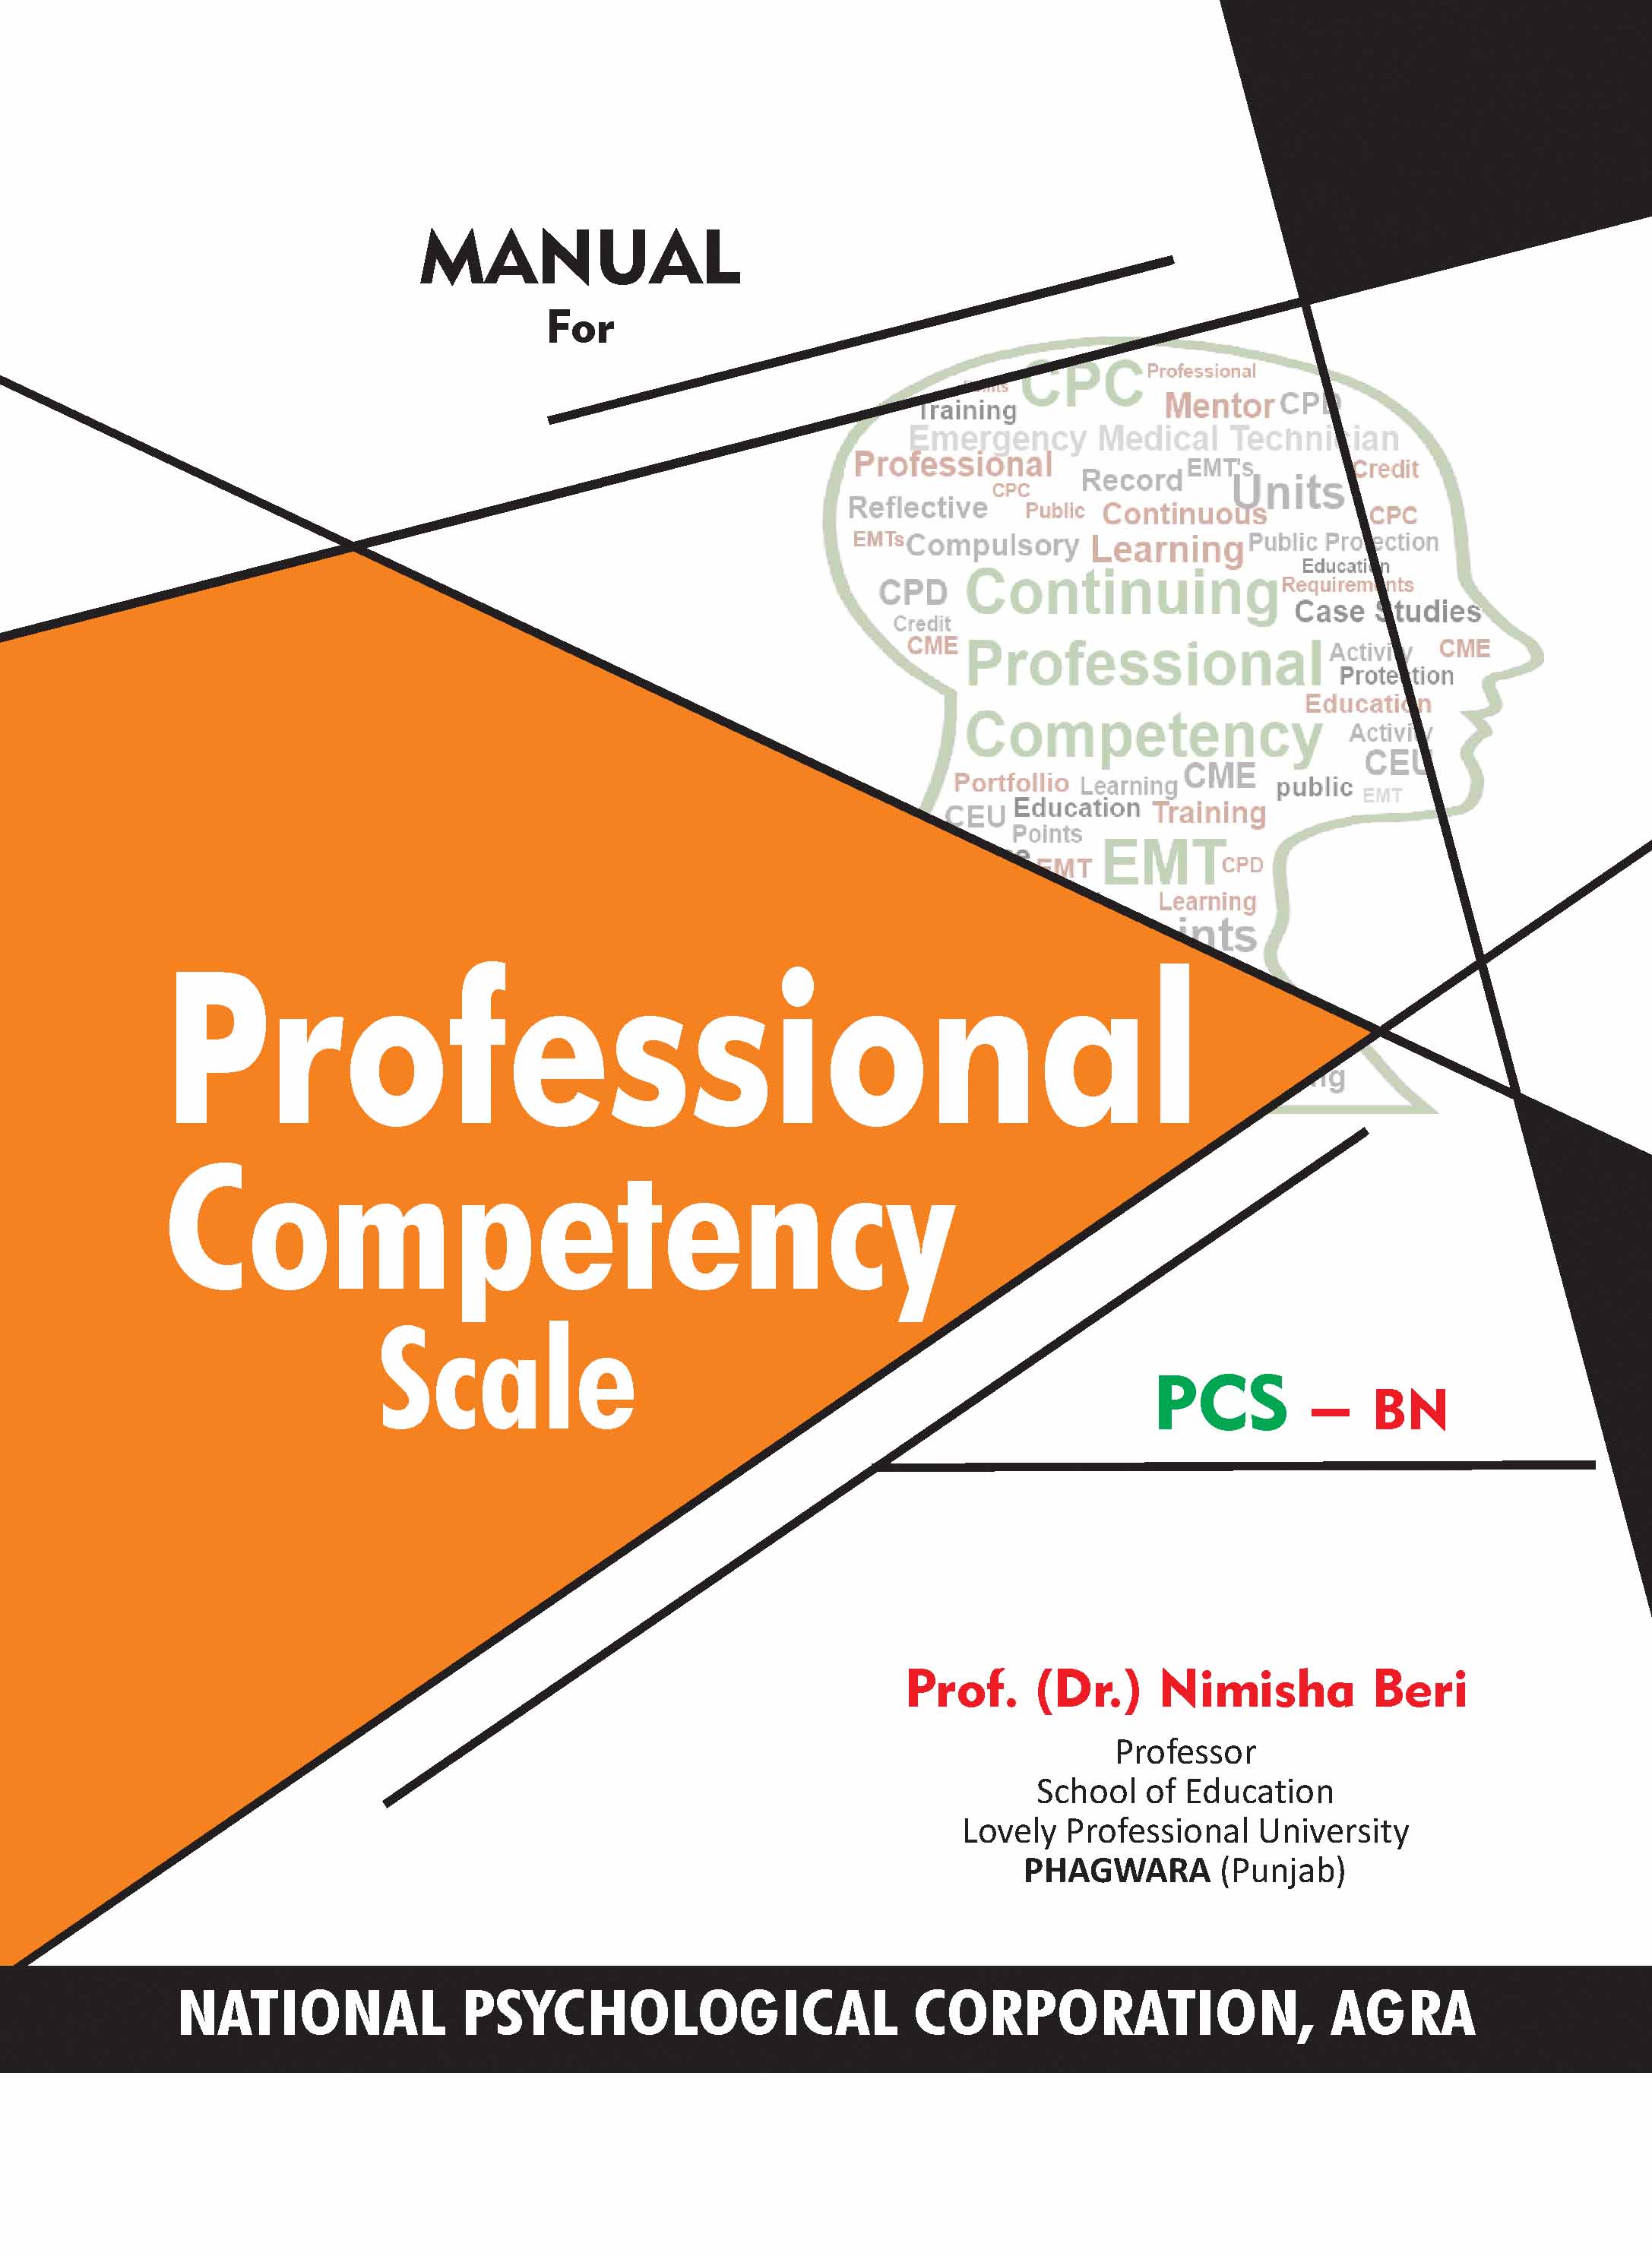 PROFESSIONAL-COMPETENCY-SCALE